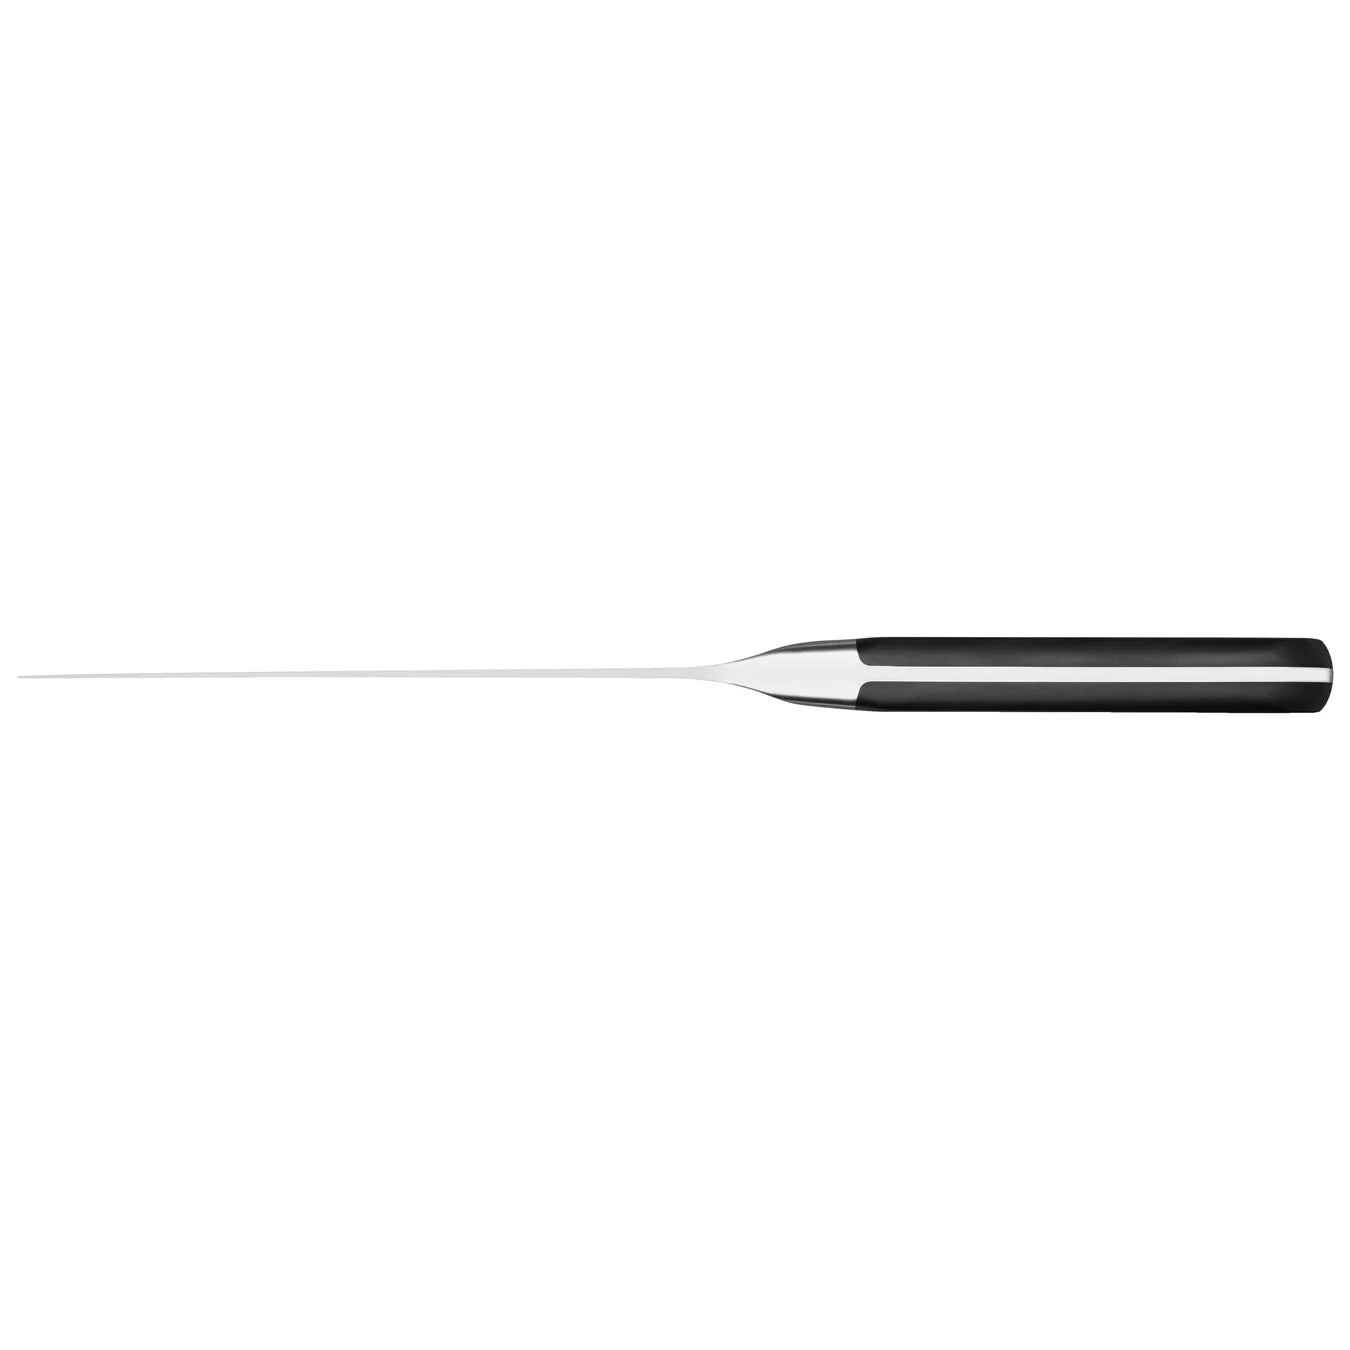 Zwilling PRO Knife Smooth chef's knife, 20 cm